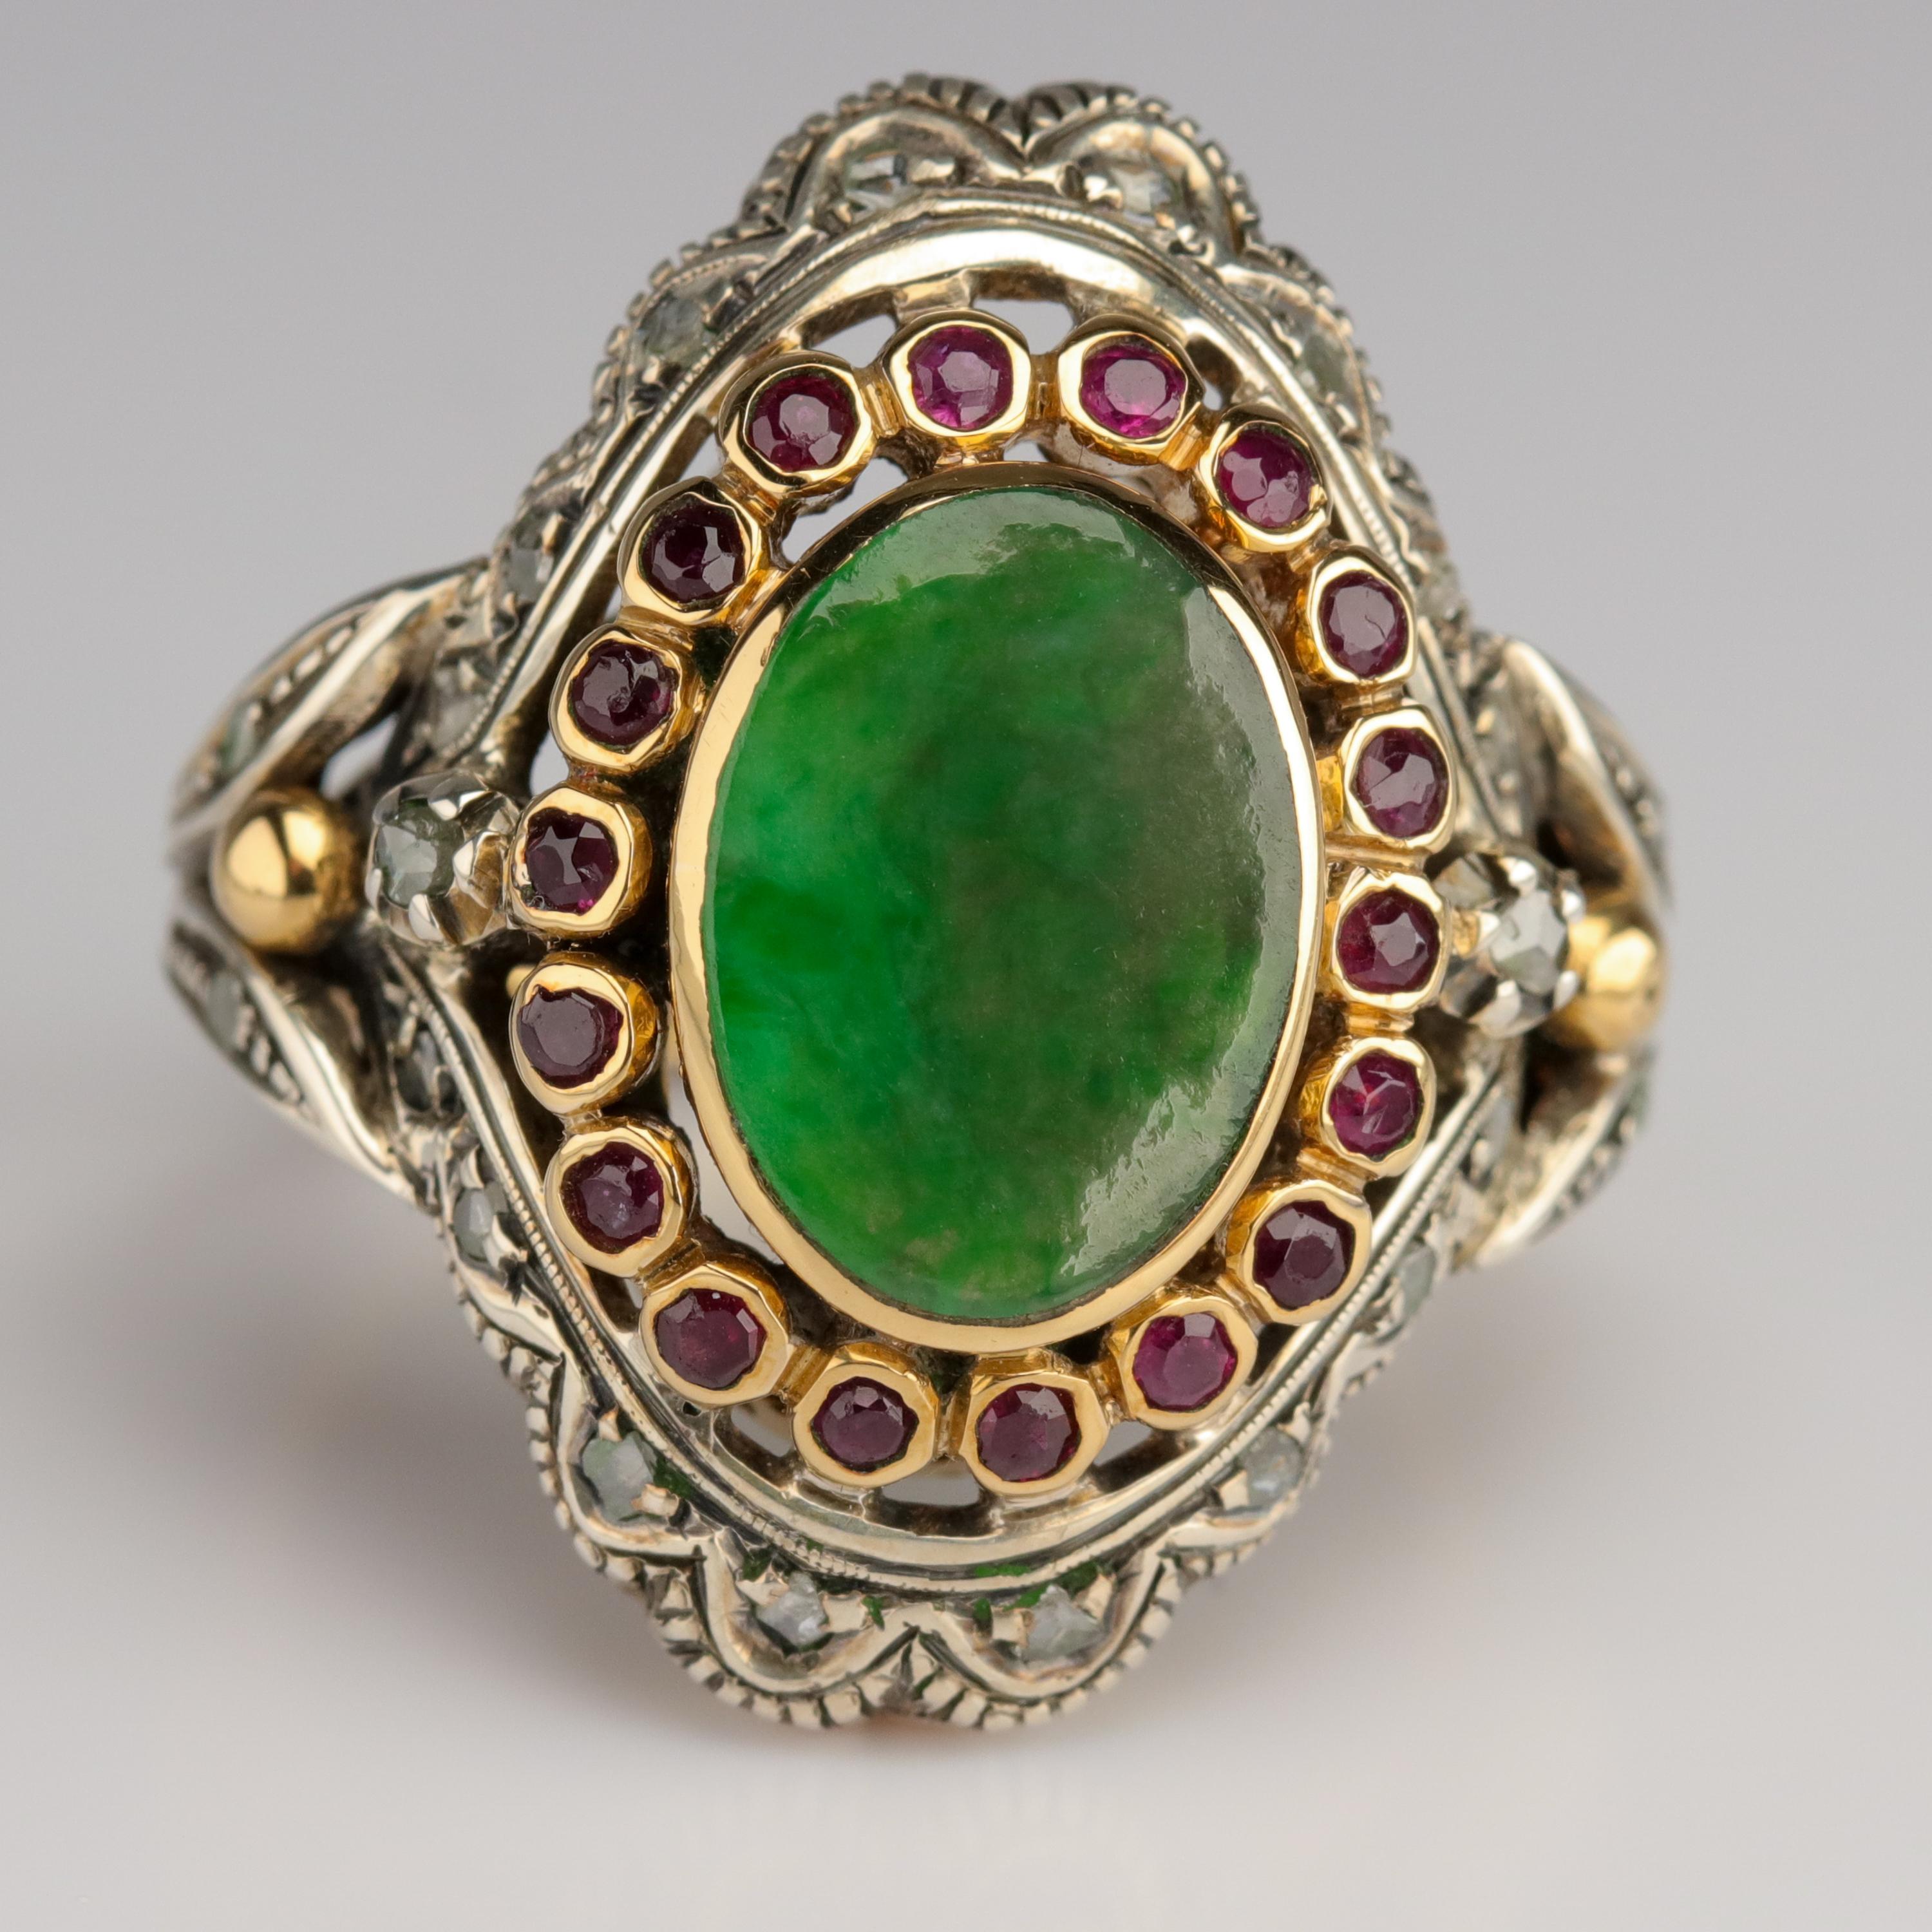 Antique Jade Ring with Rubies & Diamonds in Gold and Silver Eccentric and Ornate 5